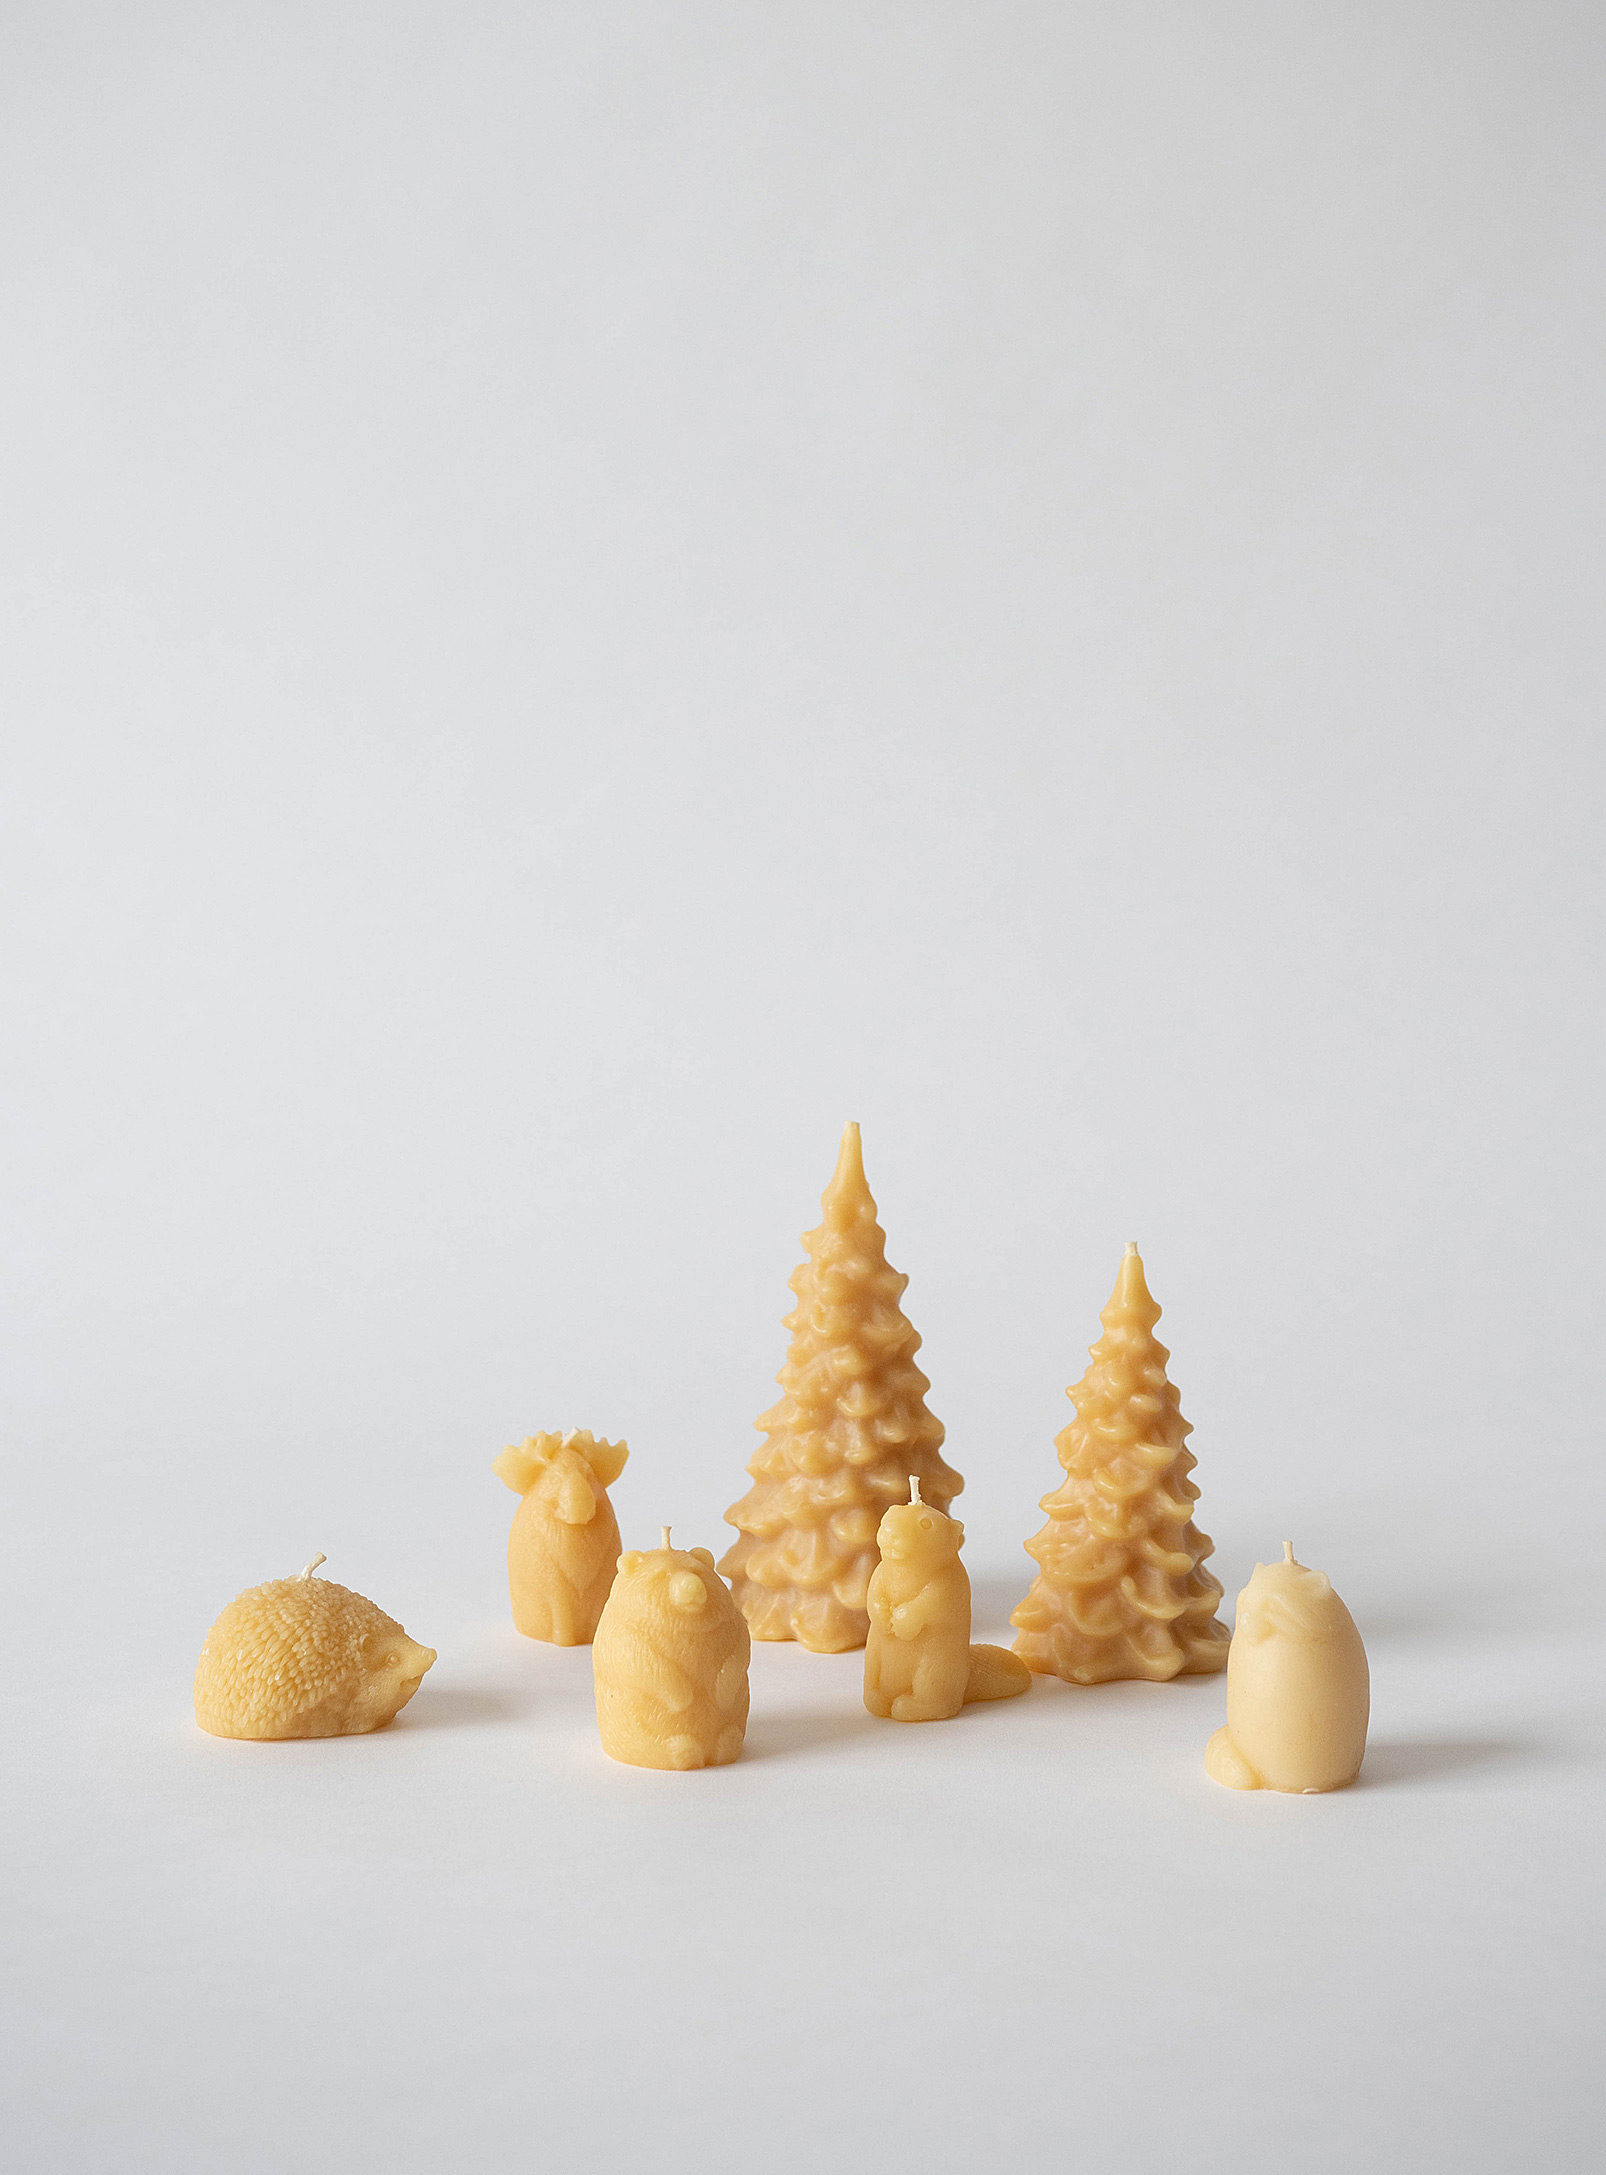 Barletta Beeswax - Woodland animal& spruce tree sculpted beeswax candle Set  of 7